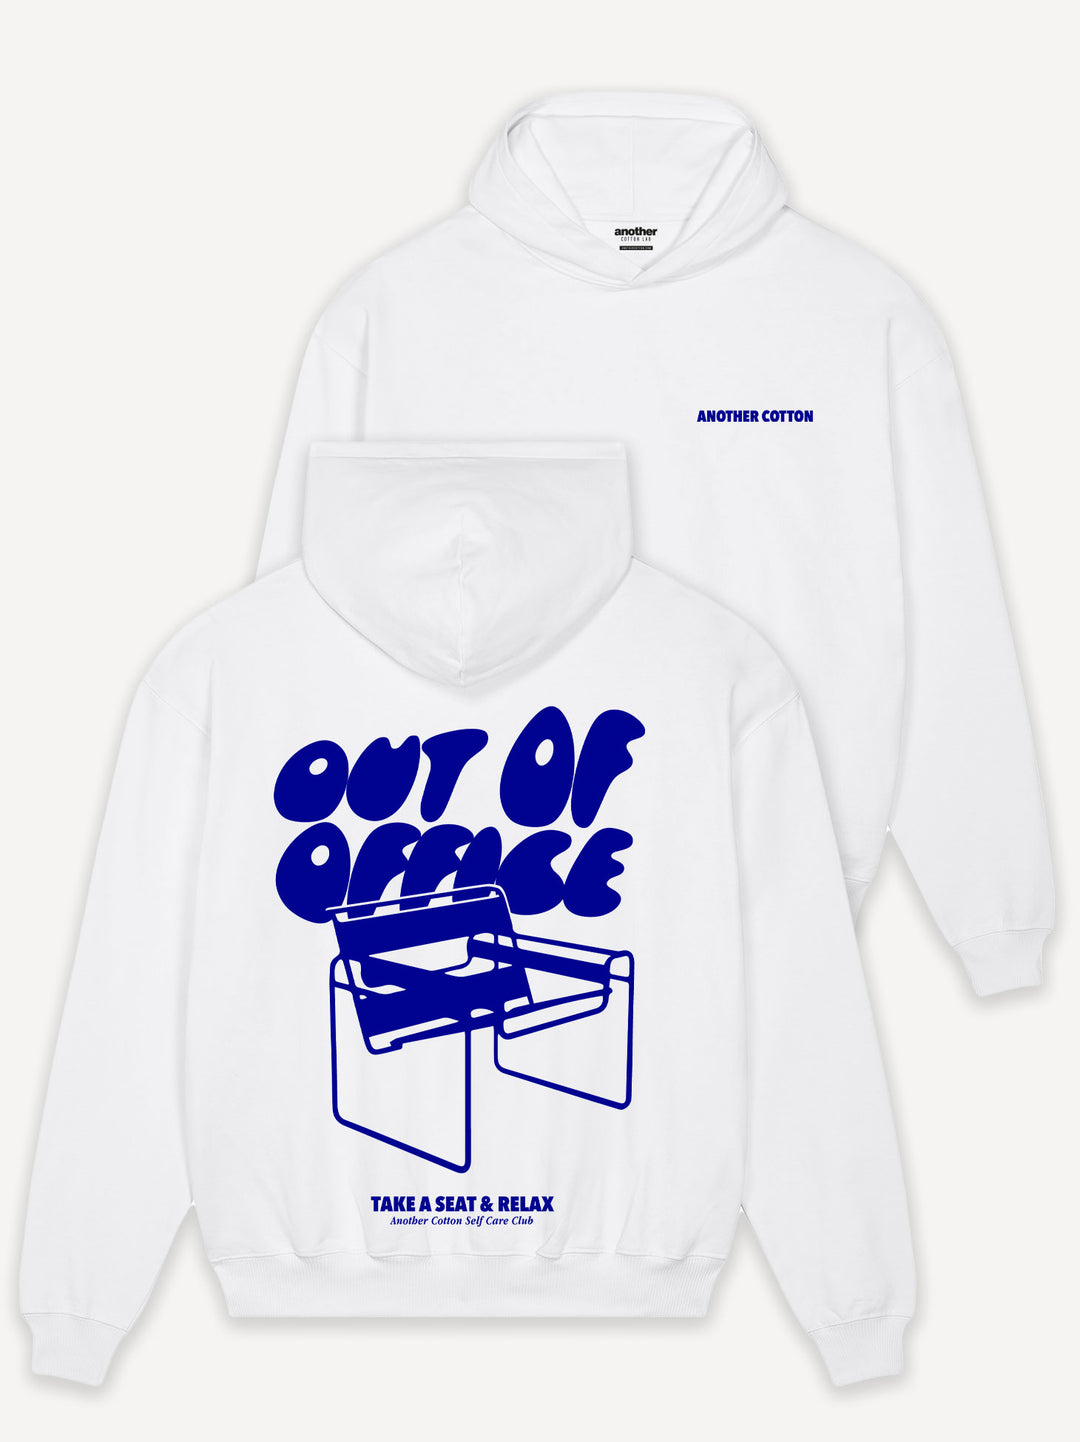 Out Of Office Heavy Oversized Hoodie